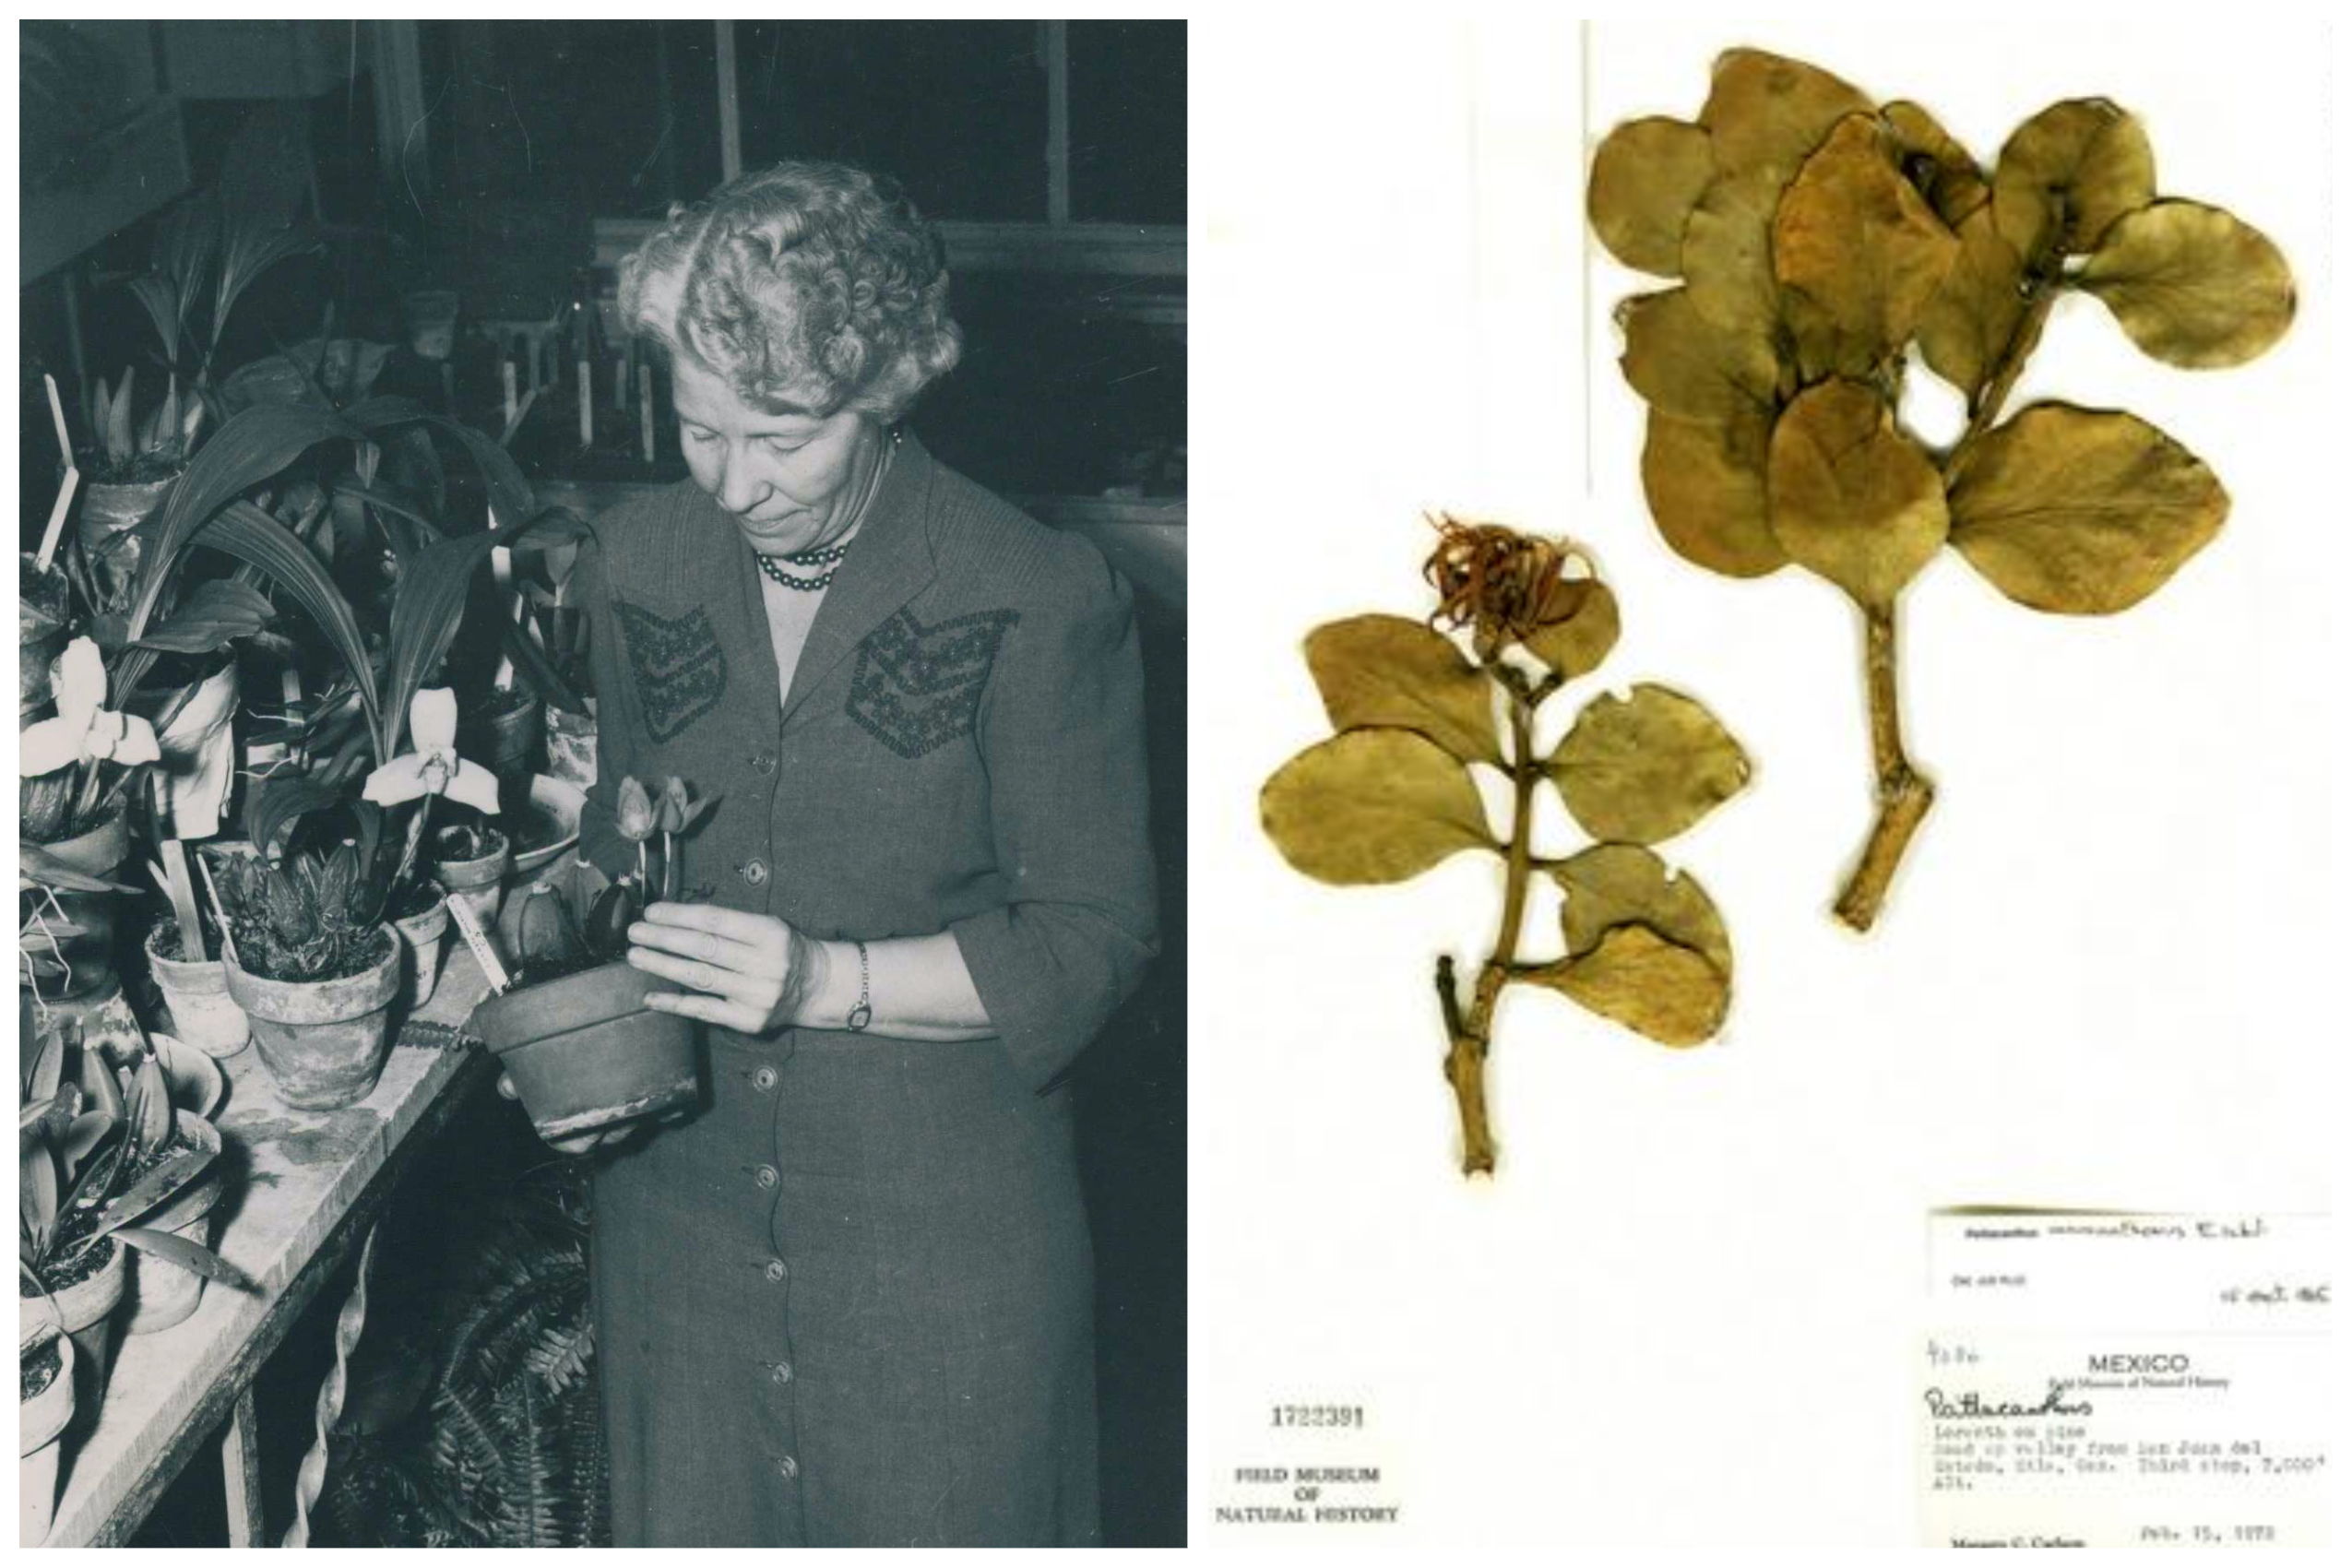 On the left, a woman looking down at a potted plant she is holding. She stands next to a work bench full of more potted plants. On the right, a herbarium specimen.